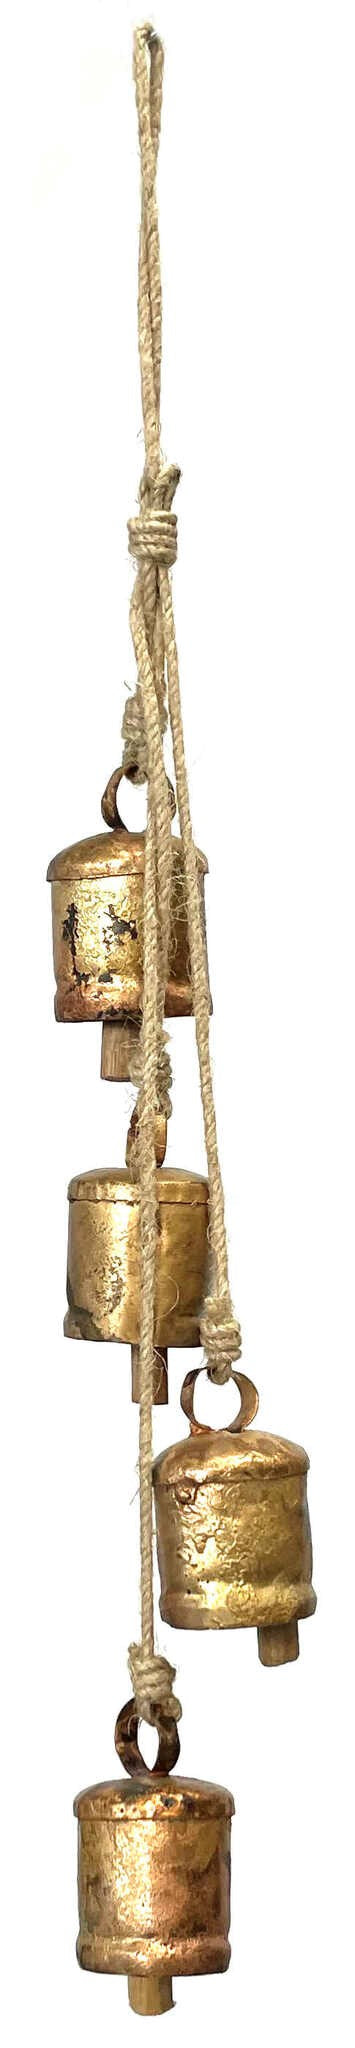 Iron Bell Chimes - Rustic Gold 18”